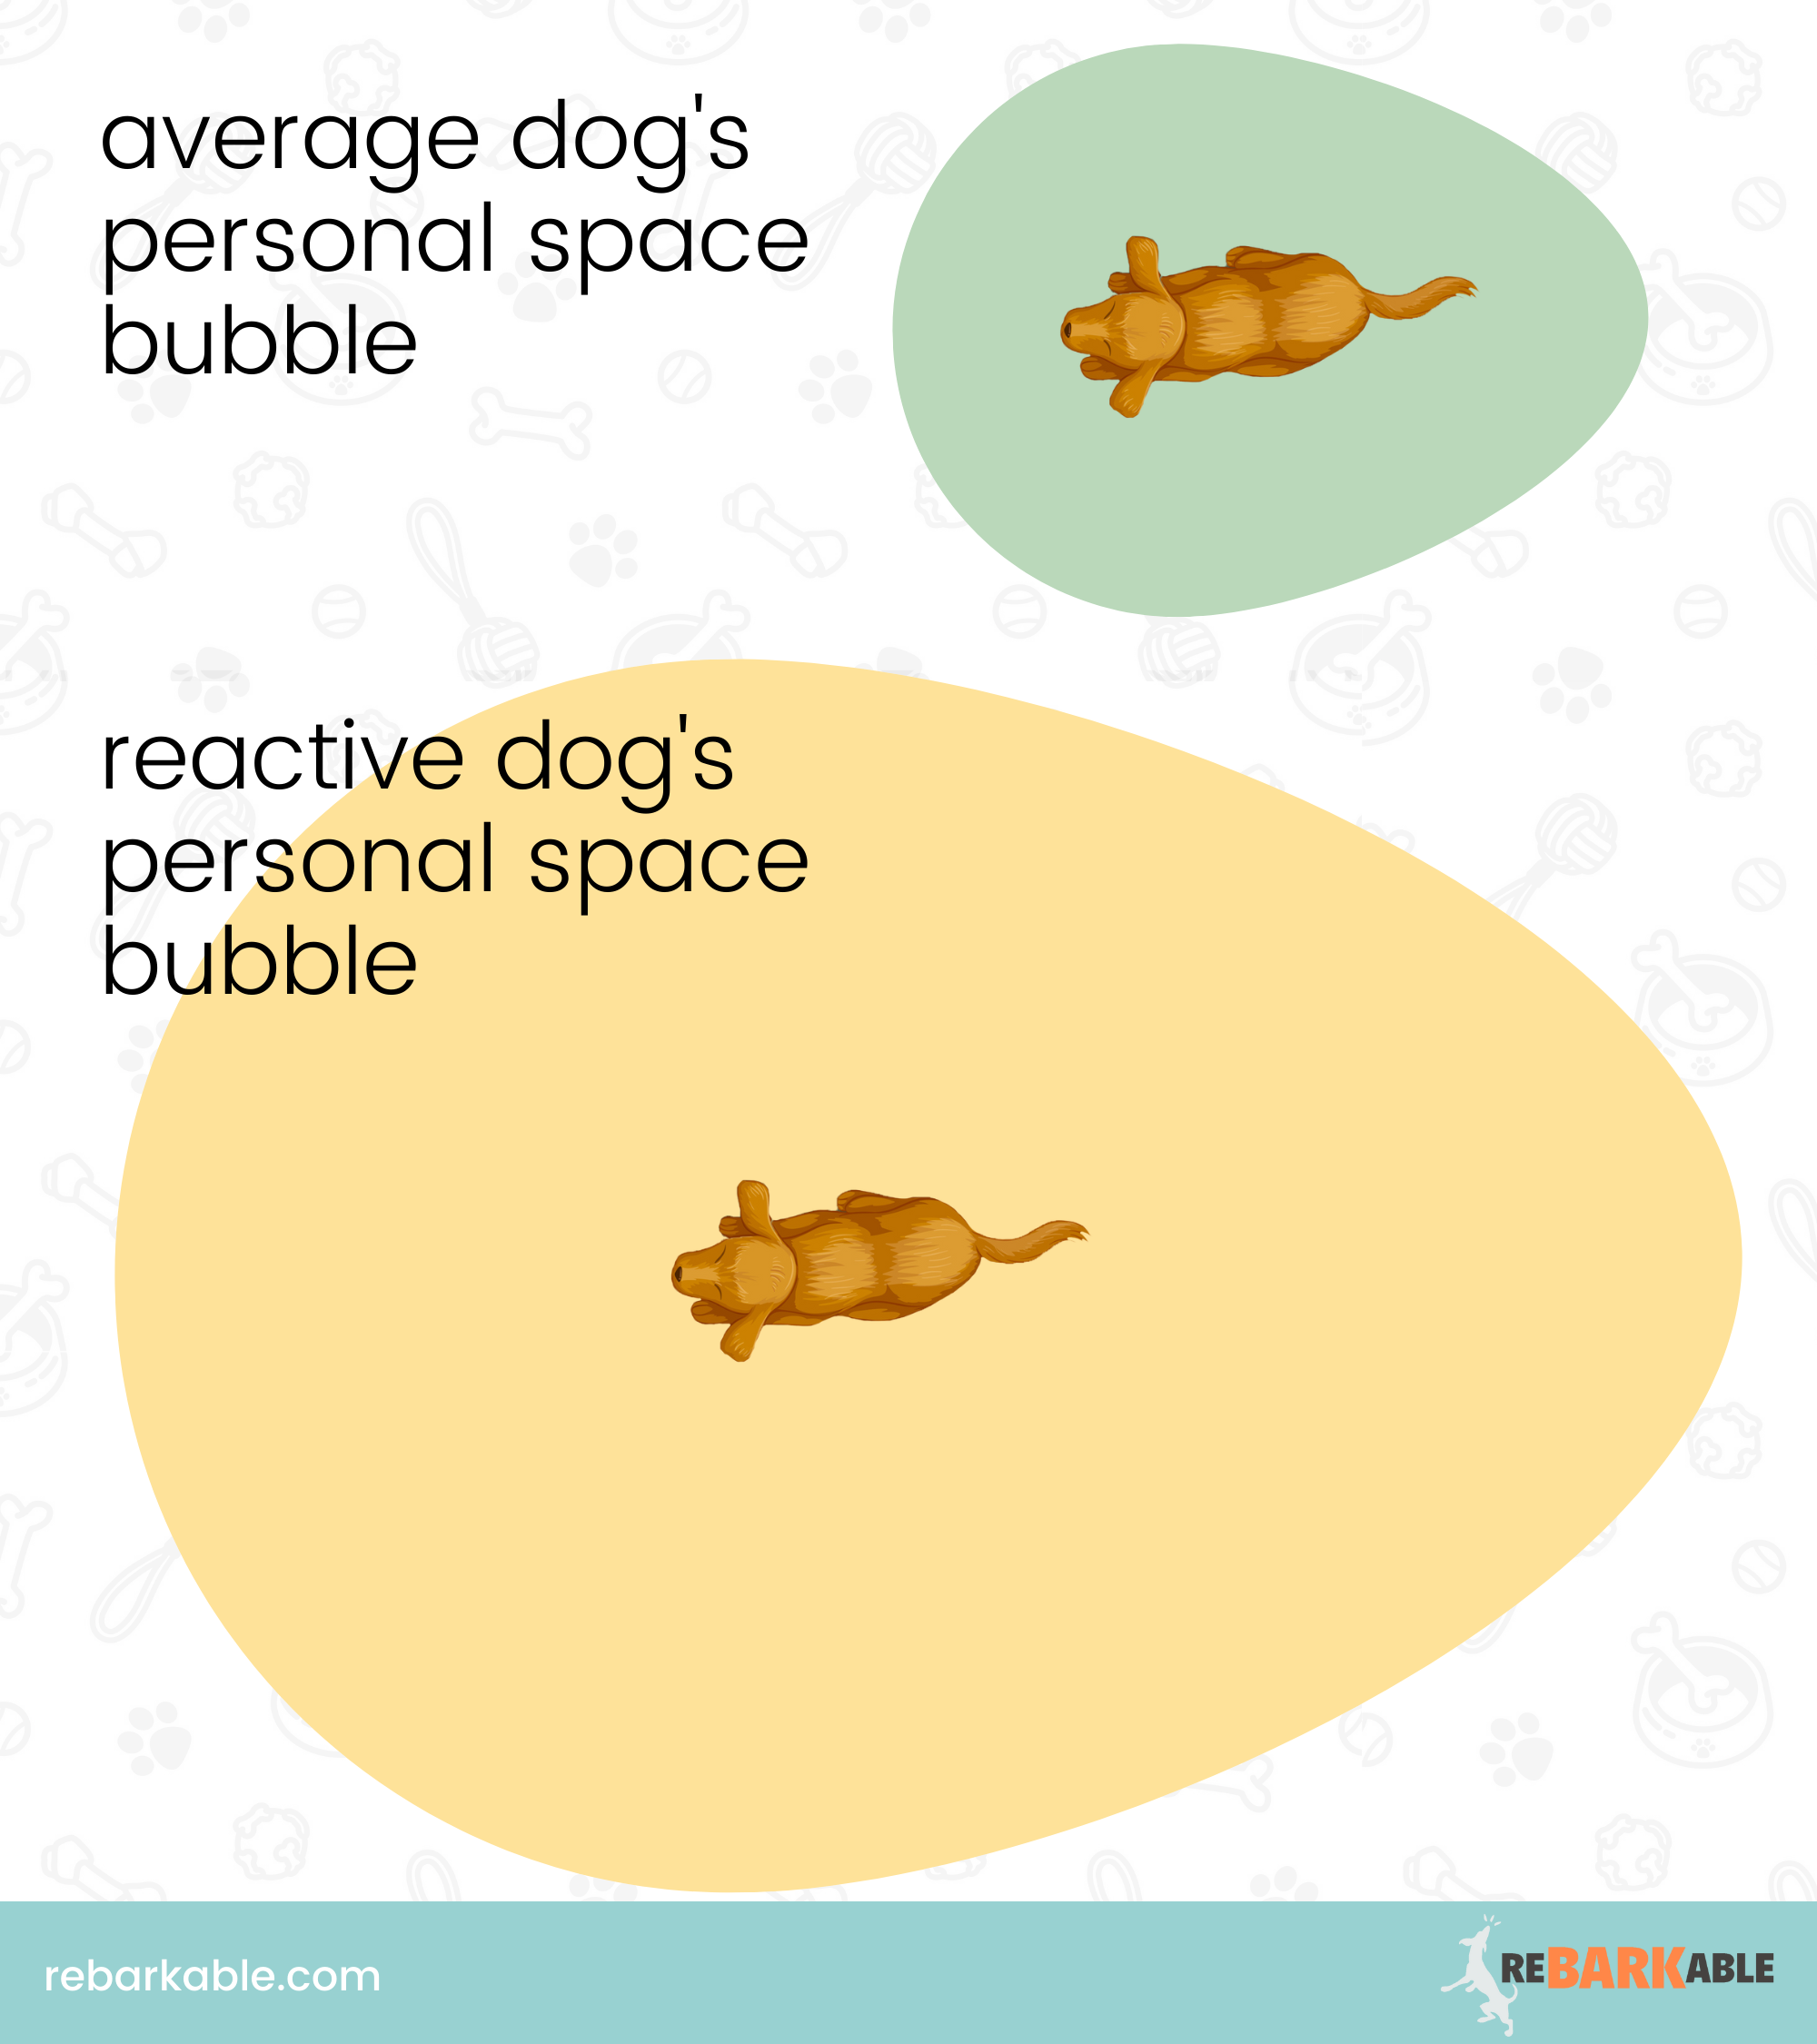 Personal space bubble for a reactive dog vs a normal dog